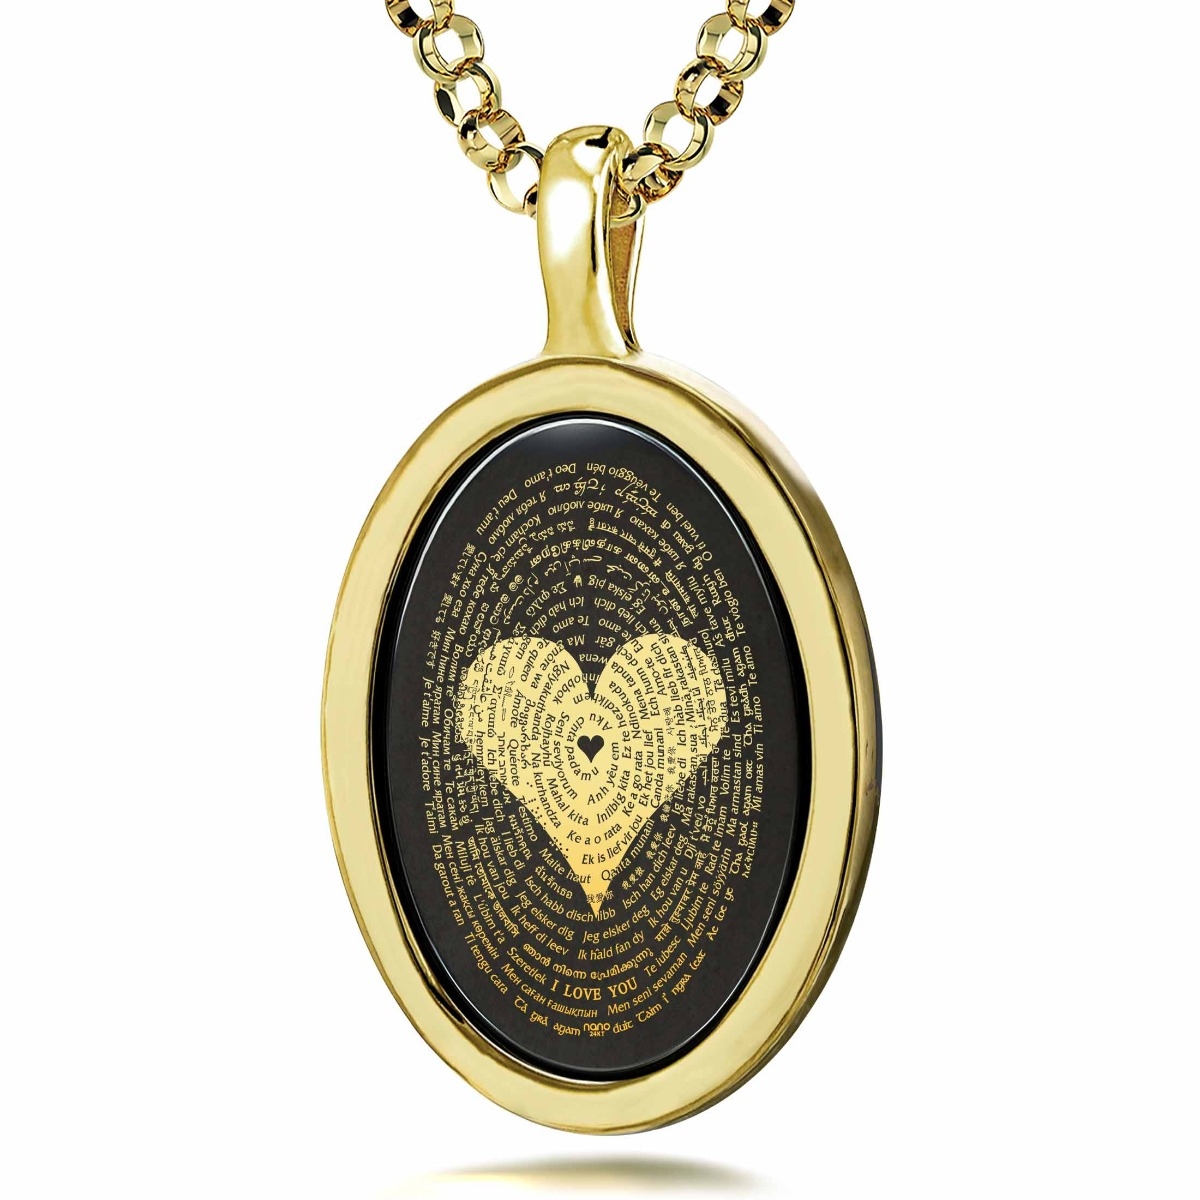 14K Gold and Onyx Necklace Micro-Inscribed with 24K Gold Heart and "I Love You" in 120 Languages - 1